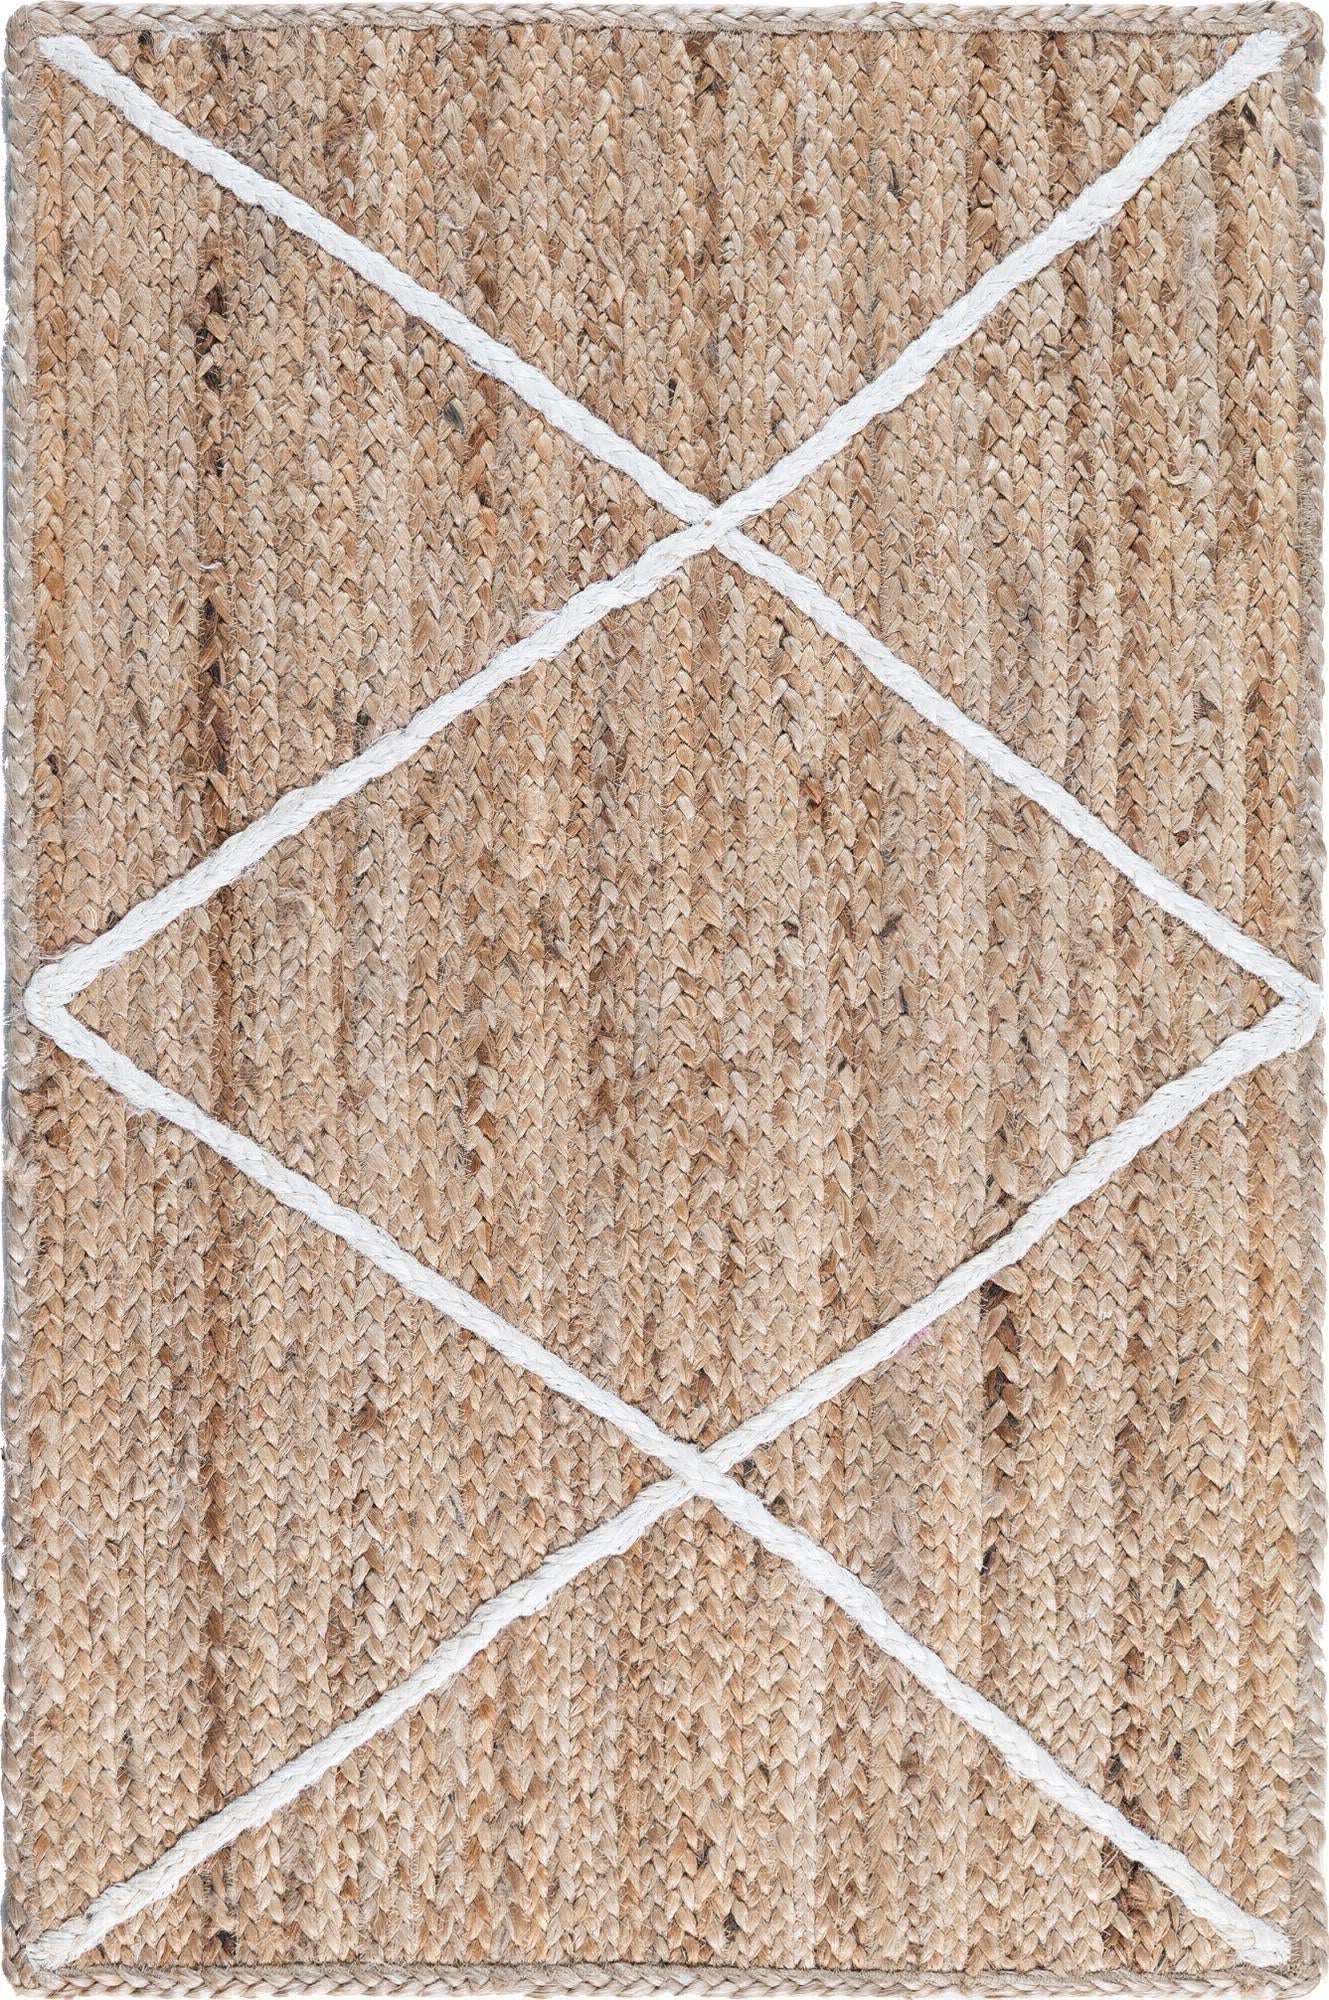 Unique Loom Braided Jute MGN-28 White Area Rug main image